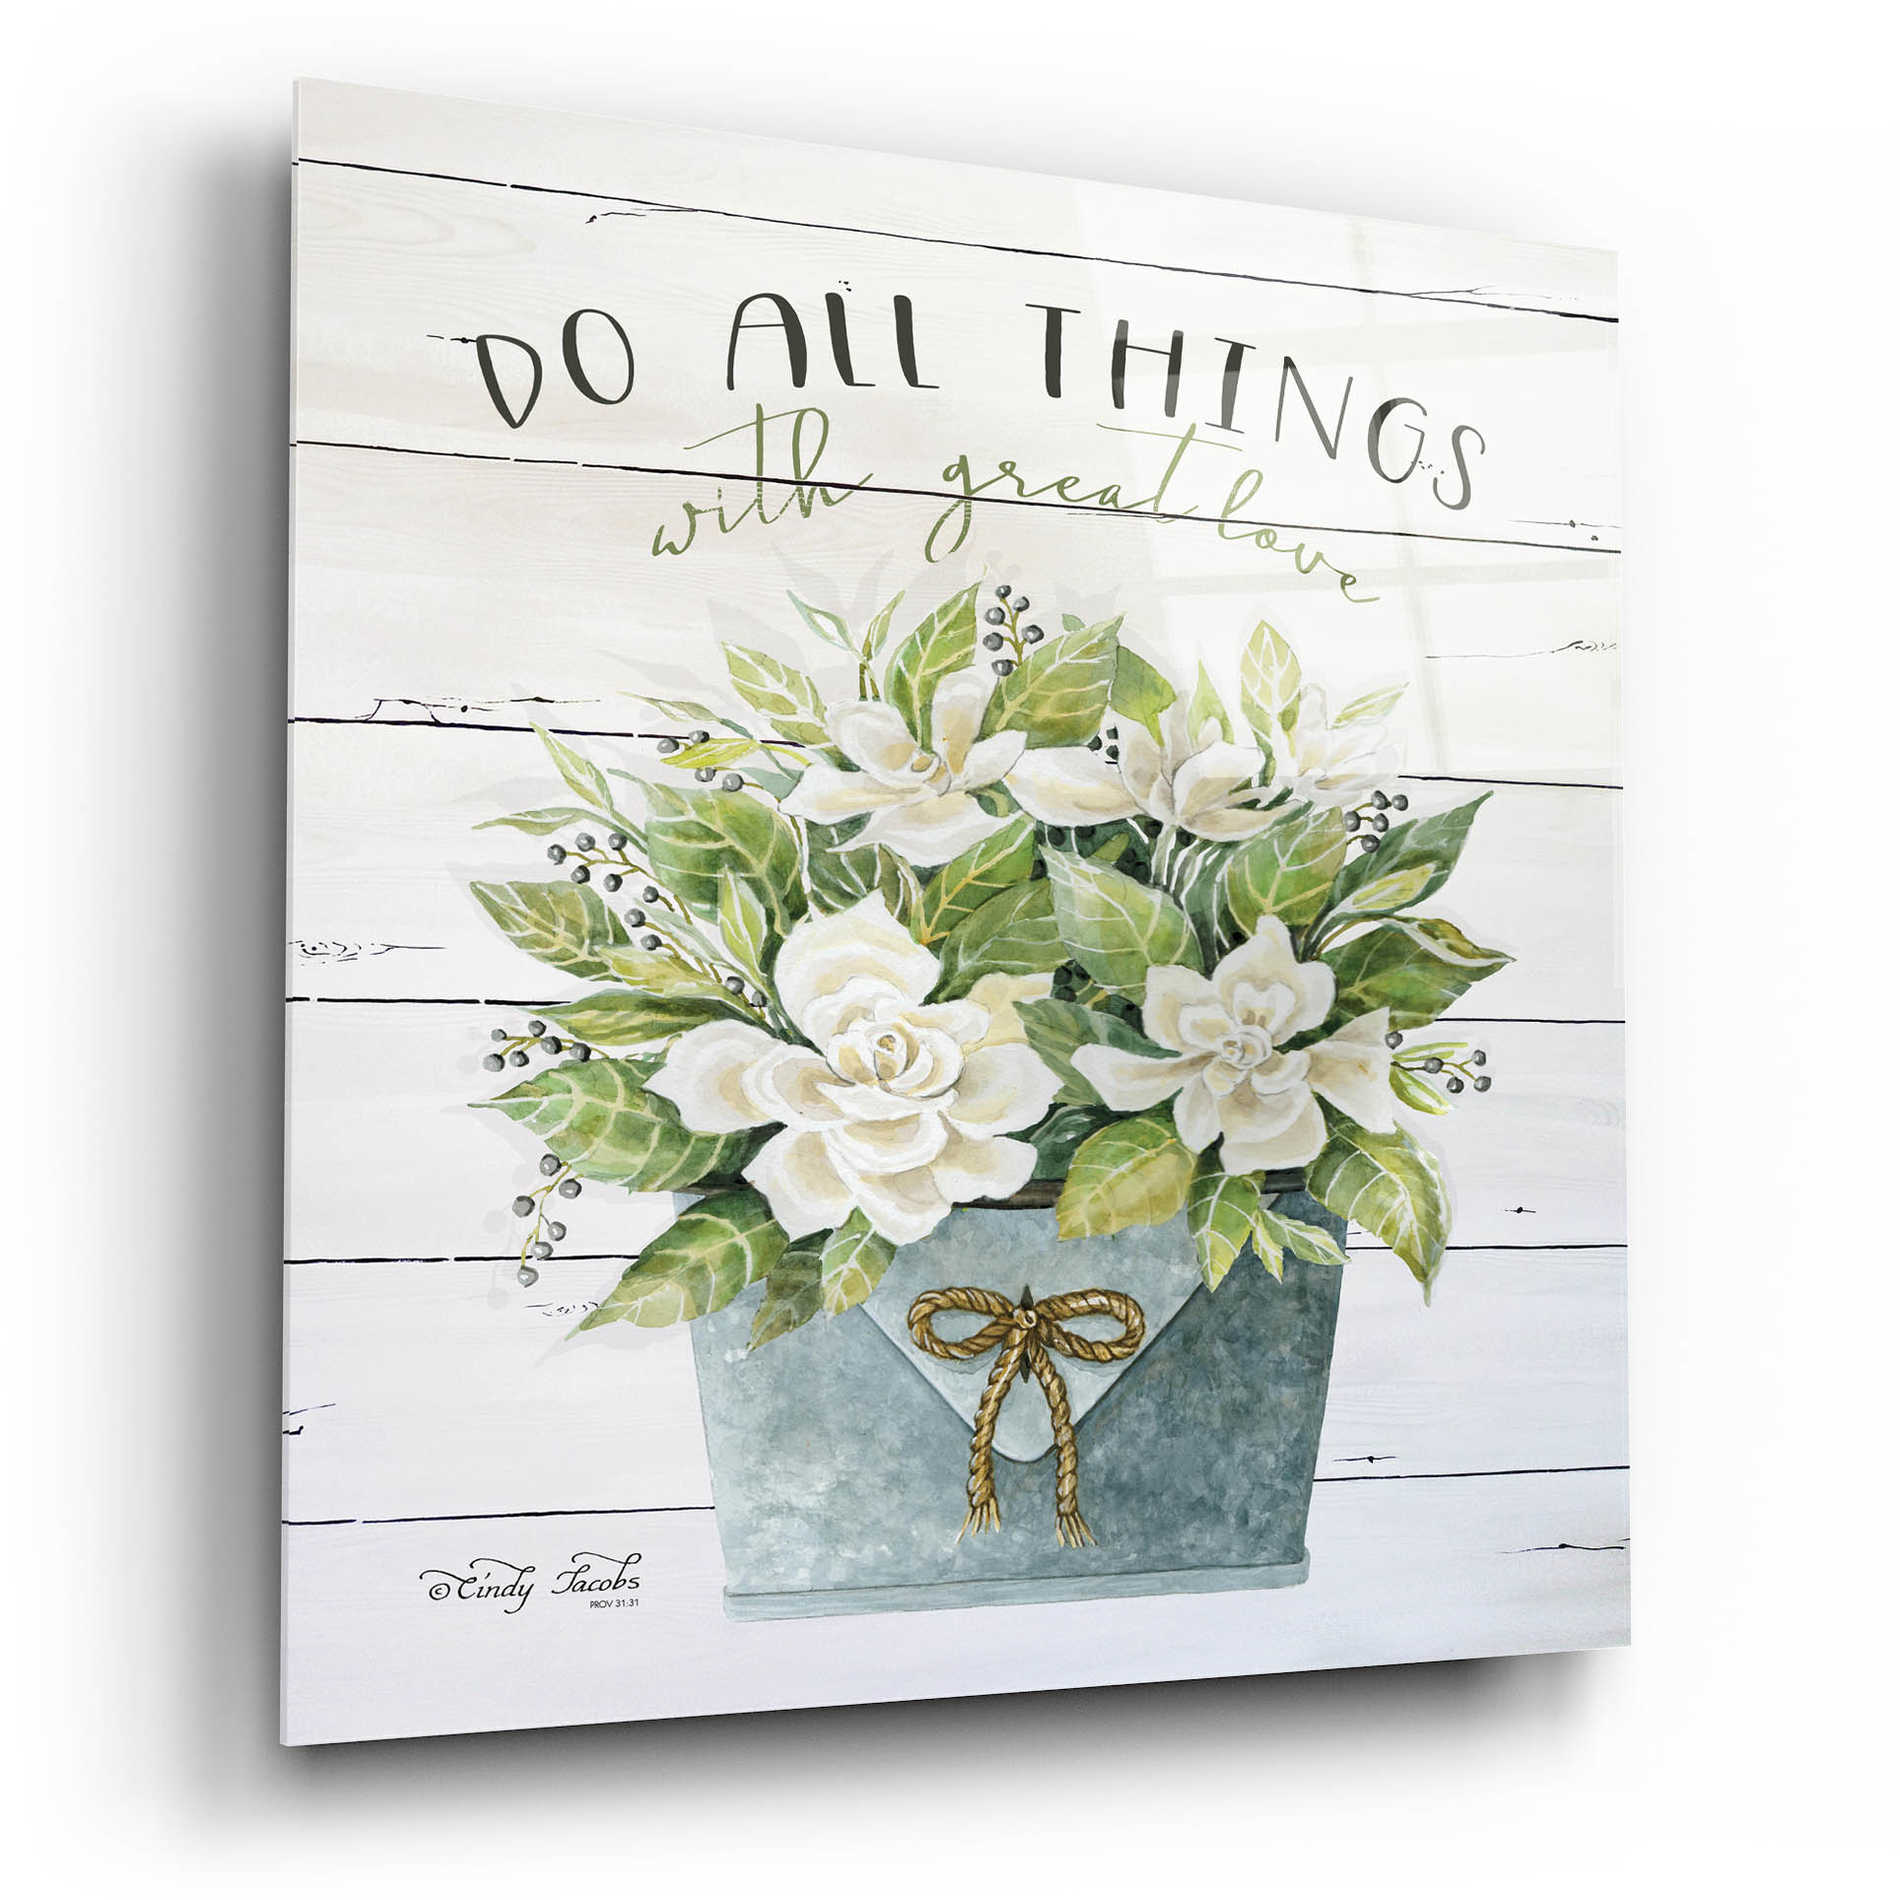 Epic Art 'Do All Things with Great Love' by Cindy Jacobs, Acrylic Glass Wall Art,12x12